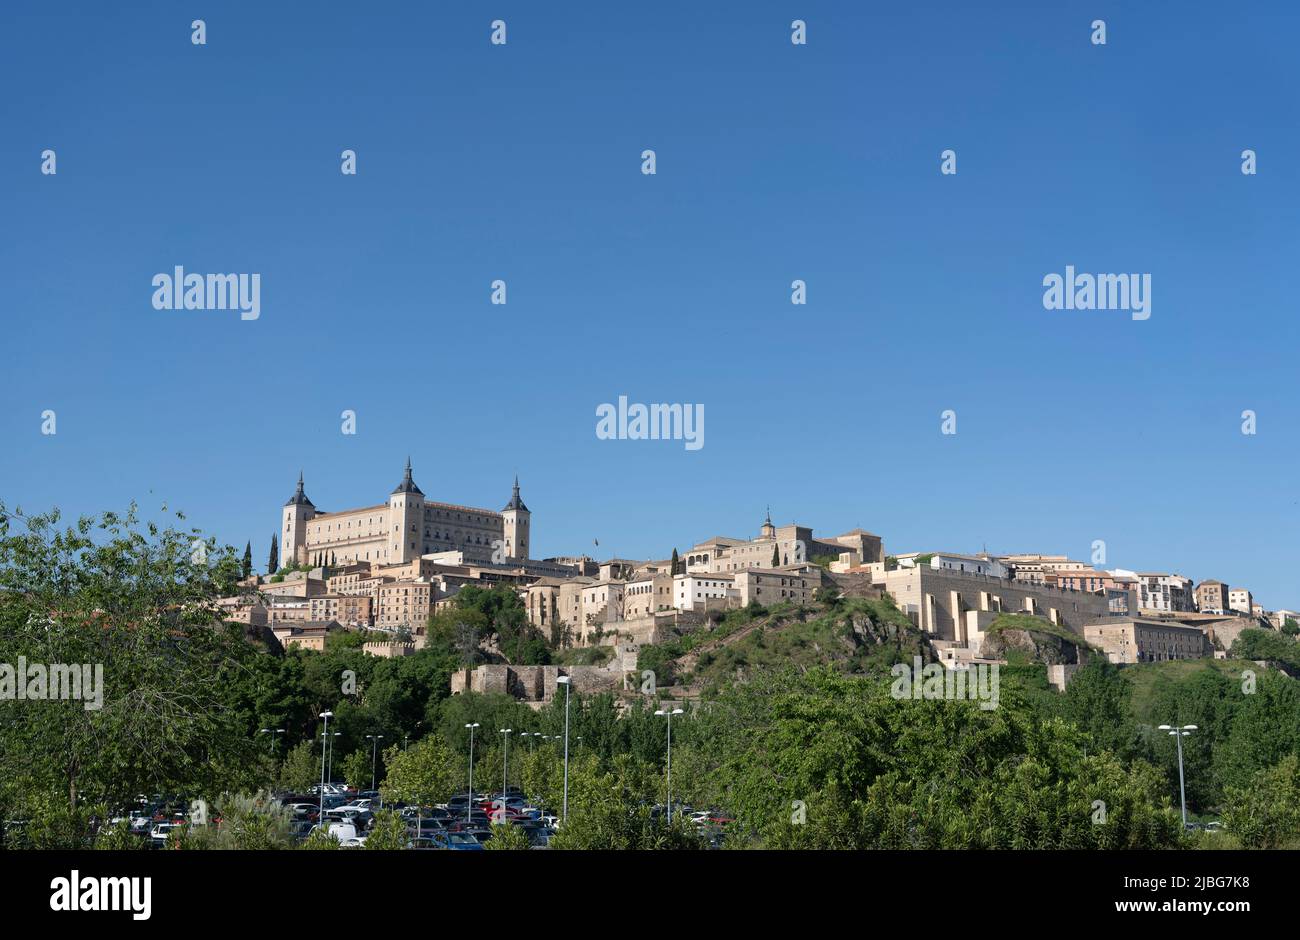 Toledo, an ancient city set on a hill above the plains of Castilla-La Mancha in central Spain. A UNESCO World Heritage Site. Stock Photo